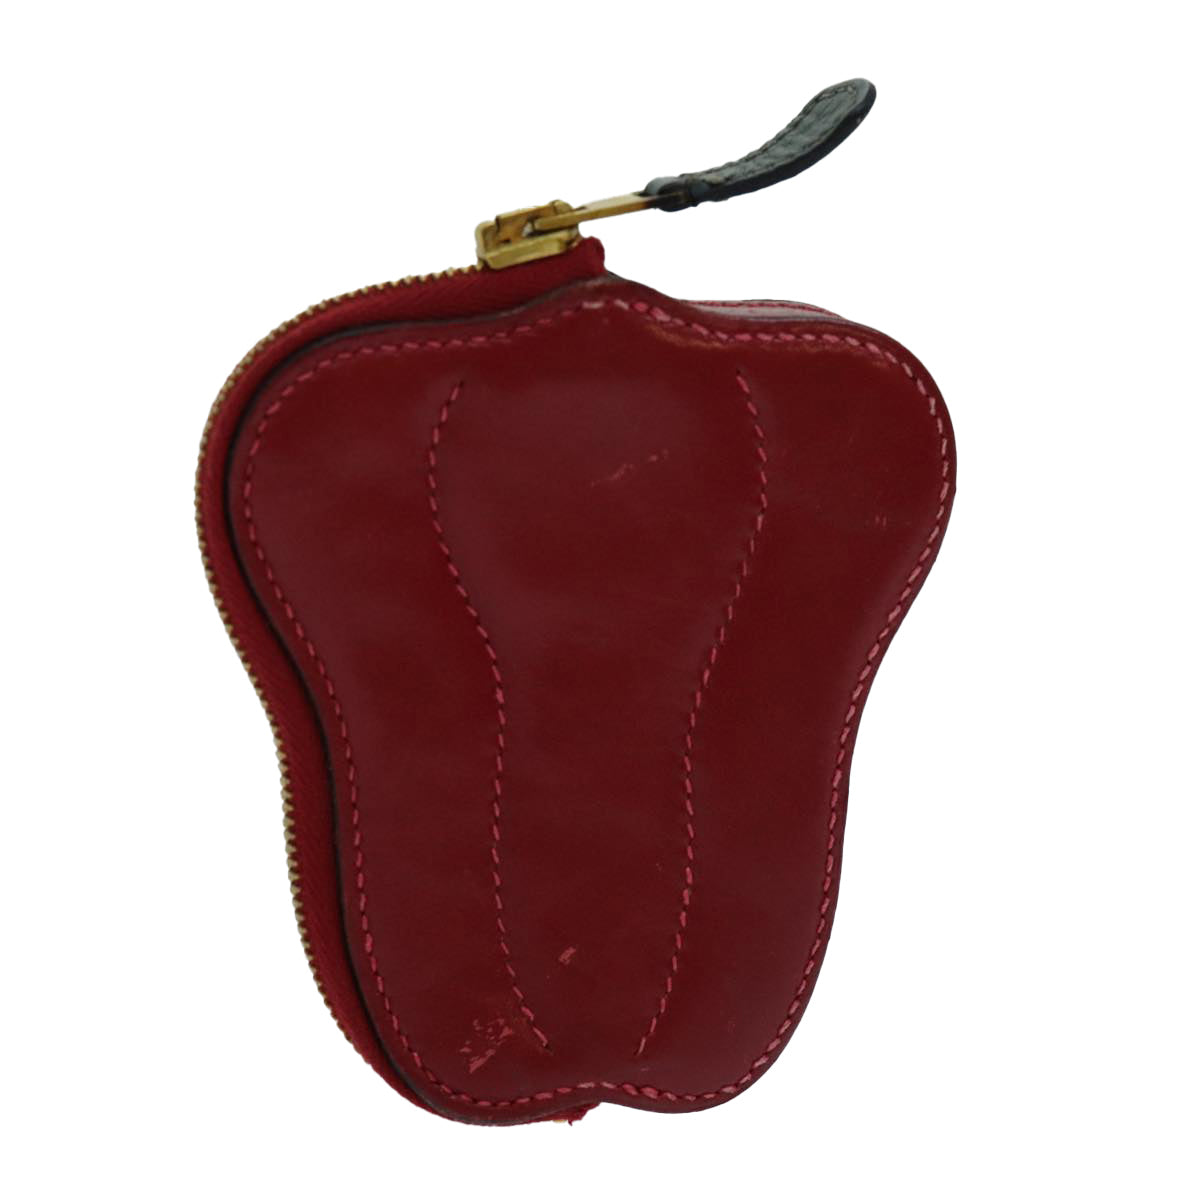 HERMES Fruit Motif Coin Purse Leather Red Auth 70056